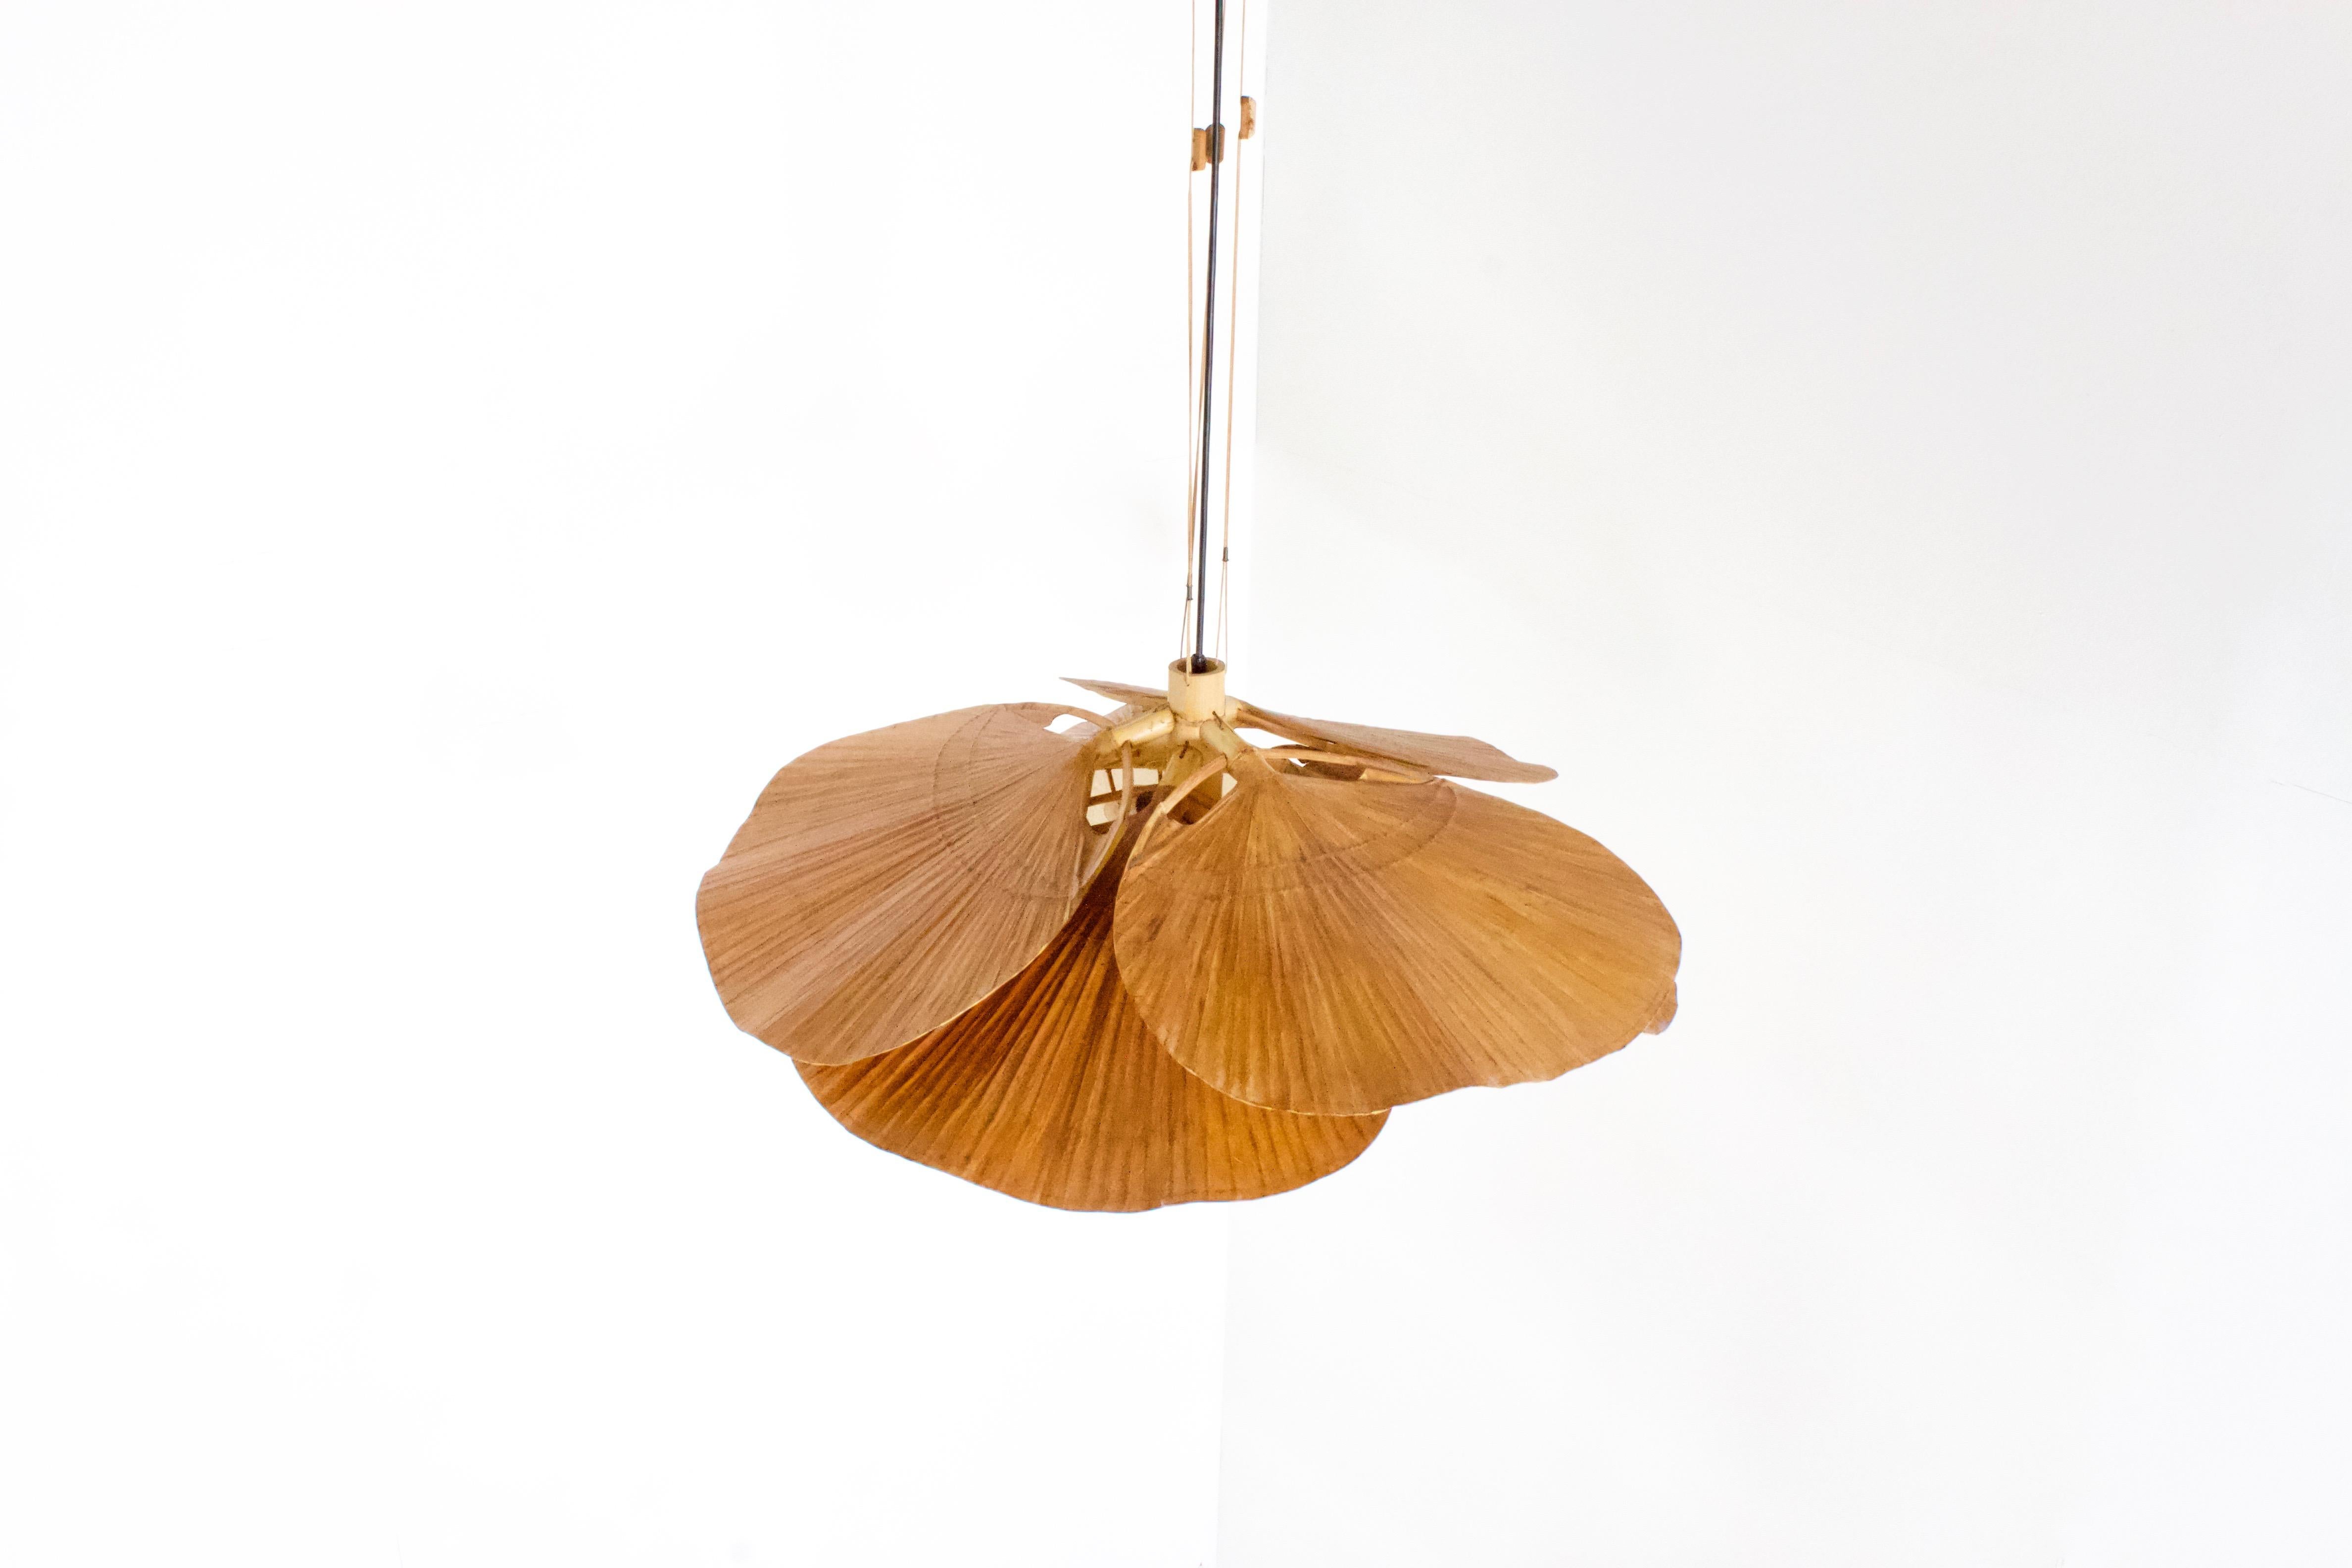 Rare large ‘Uchiwa’ chandelier by Ingo Maurer in very good condition. 

Designed by Ingo Maurer for M design, Germany. 

This lamp is handmade from bamboo, fabric and Japanese rice paper. 

The lamp consists of six large fans hanging from a